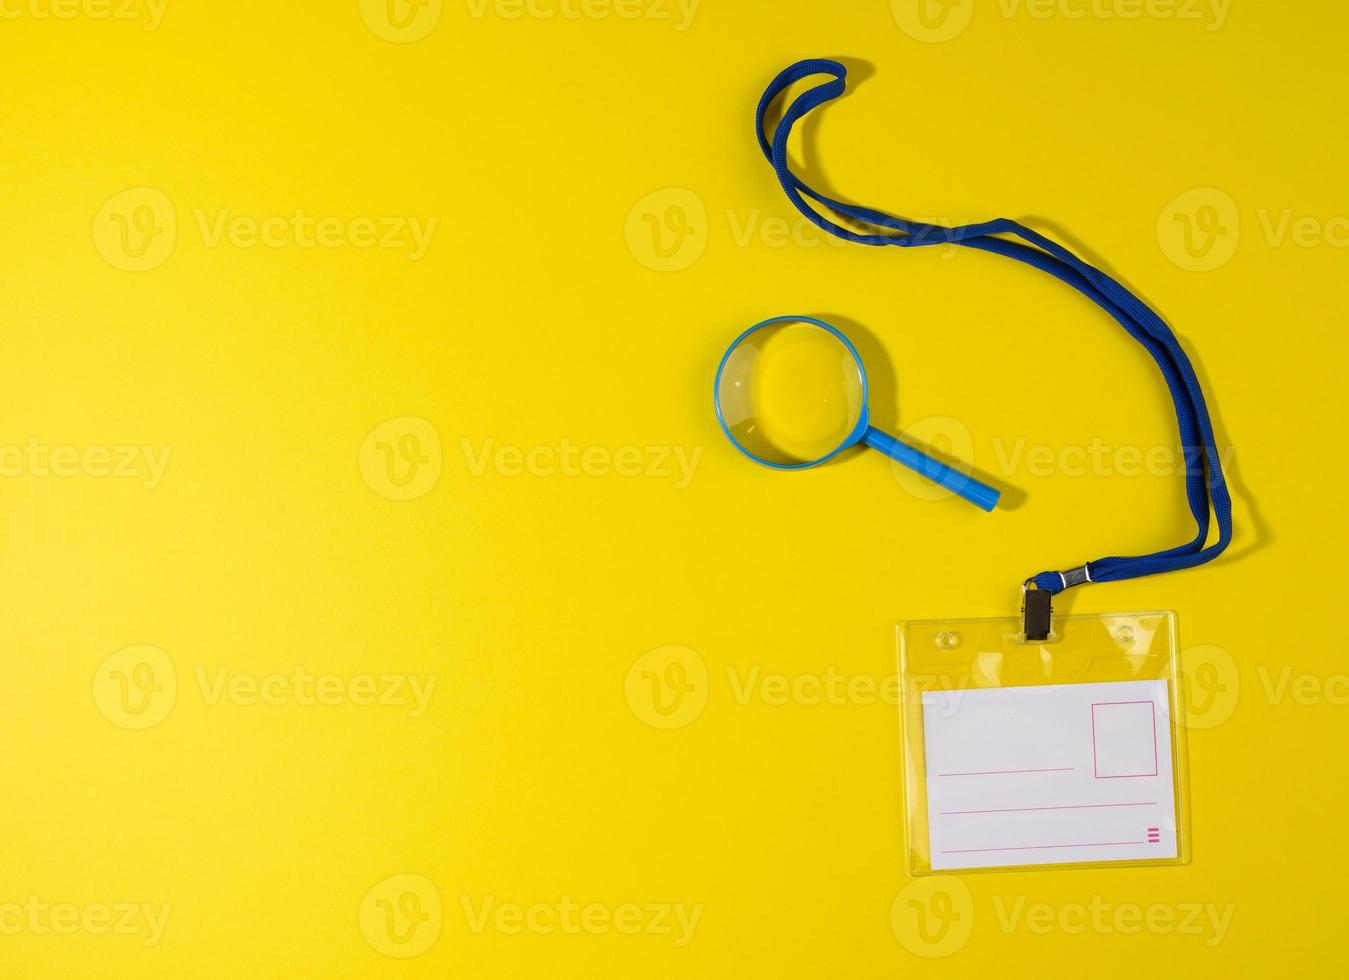 transparent plastic badge on a blue lanyard on a yellow background photo